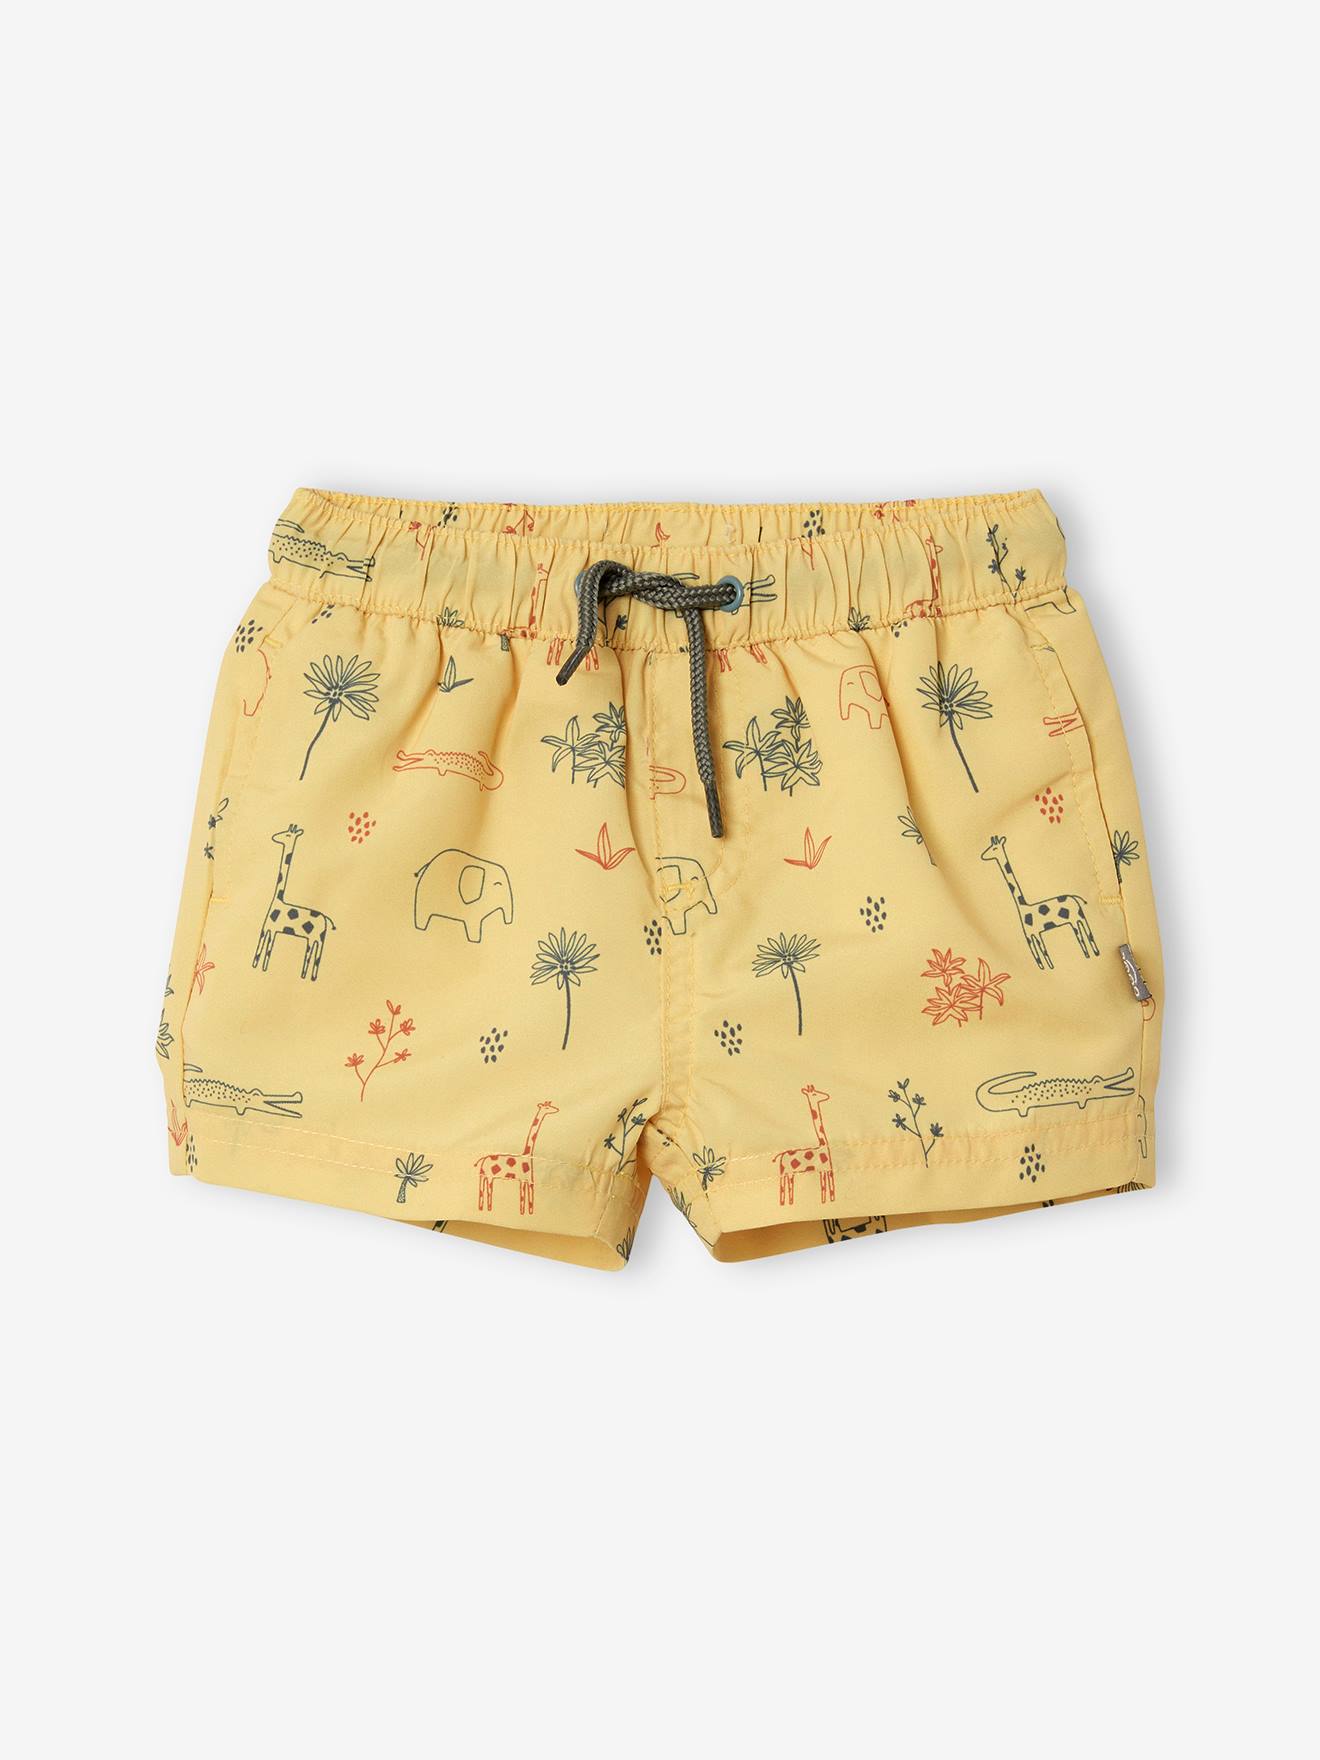 Jungle Swim Shorts for Baby Boys yellow light all over printed